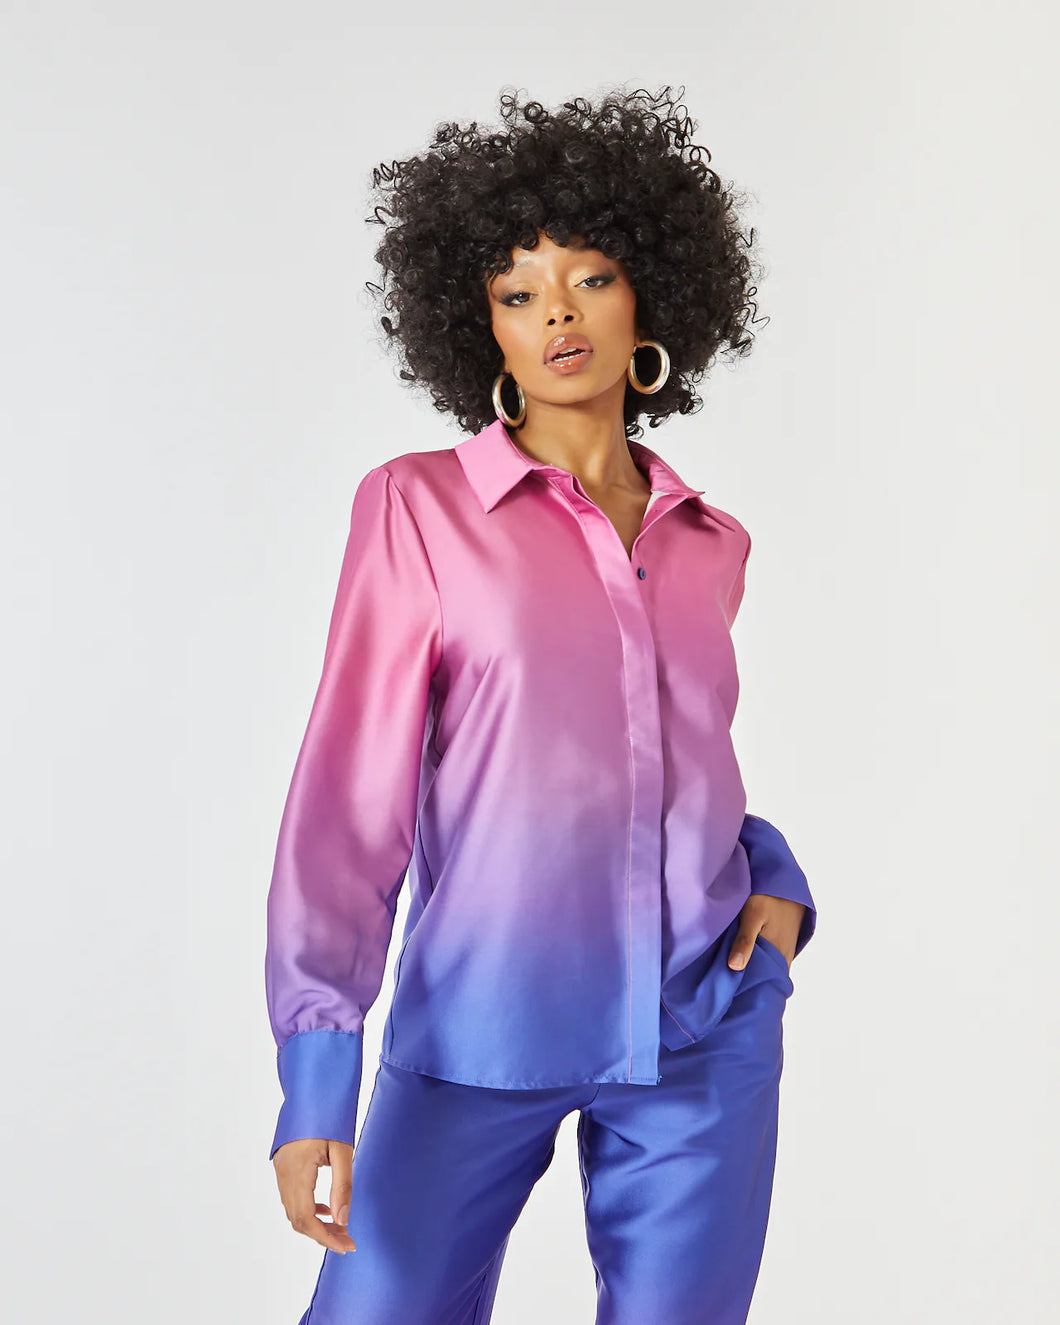 BLUE AND PURPLE OMBRE SATIN BLOUSE